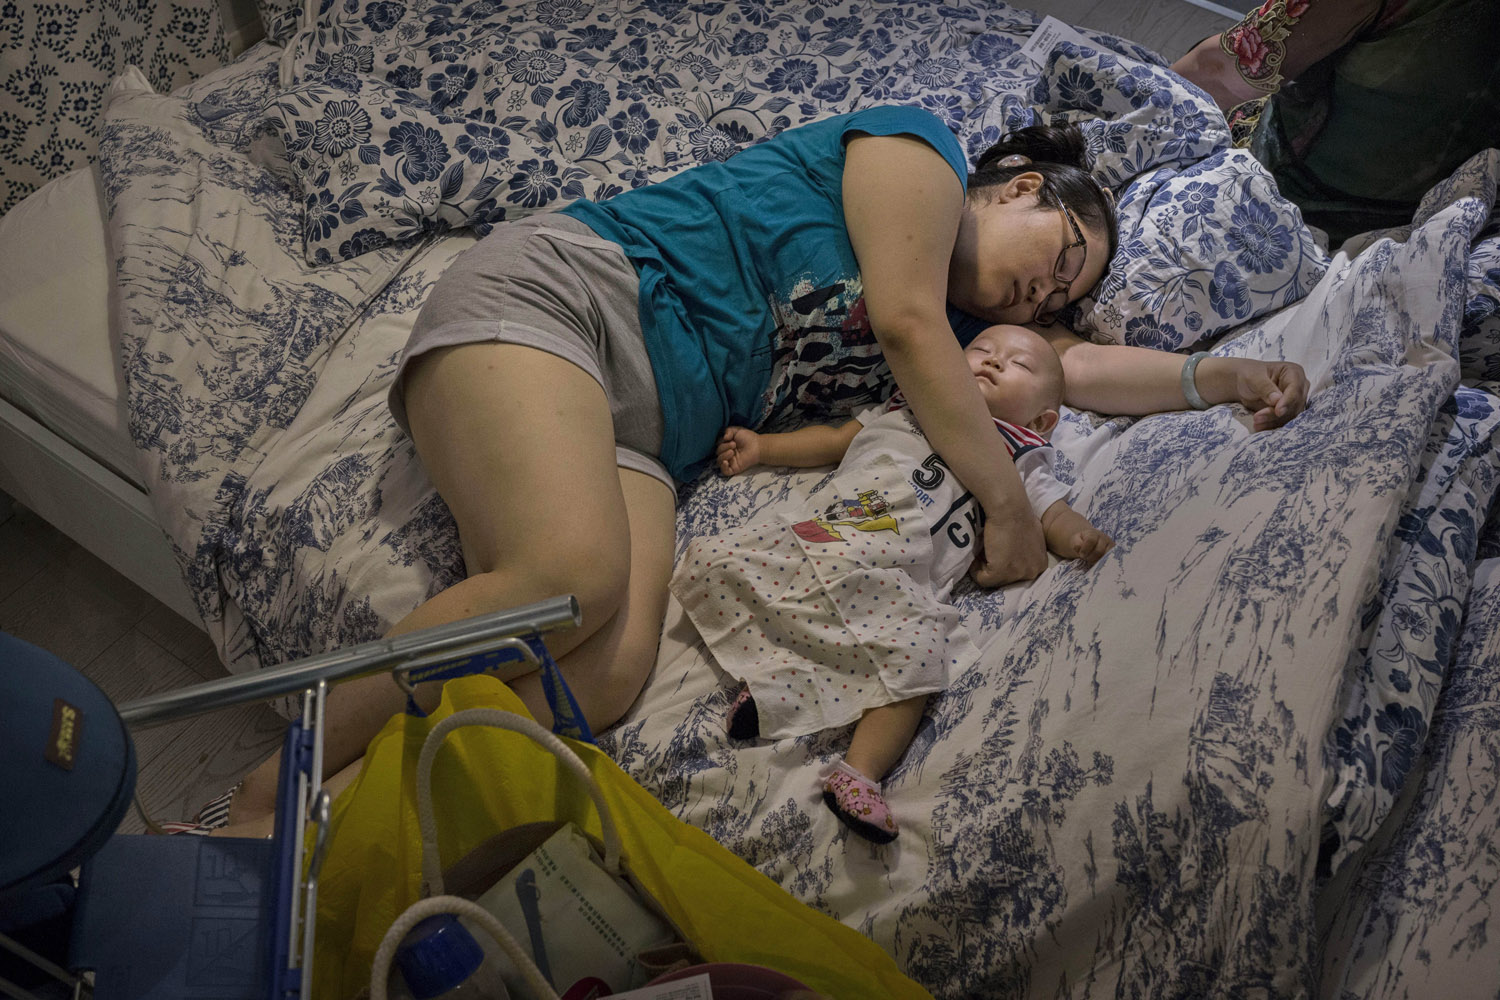 Jul. 6, 2014. A Chinese shopper sleeps with her child on a bed in the showroom of the IKEA store on in Beijing, China. Of the world's ten biggest Ikea stores, 8 of them are in China to cater to the country's growing middle class.